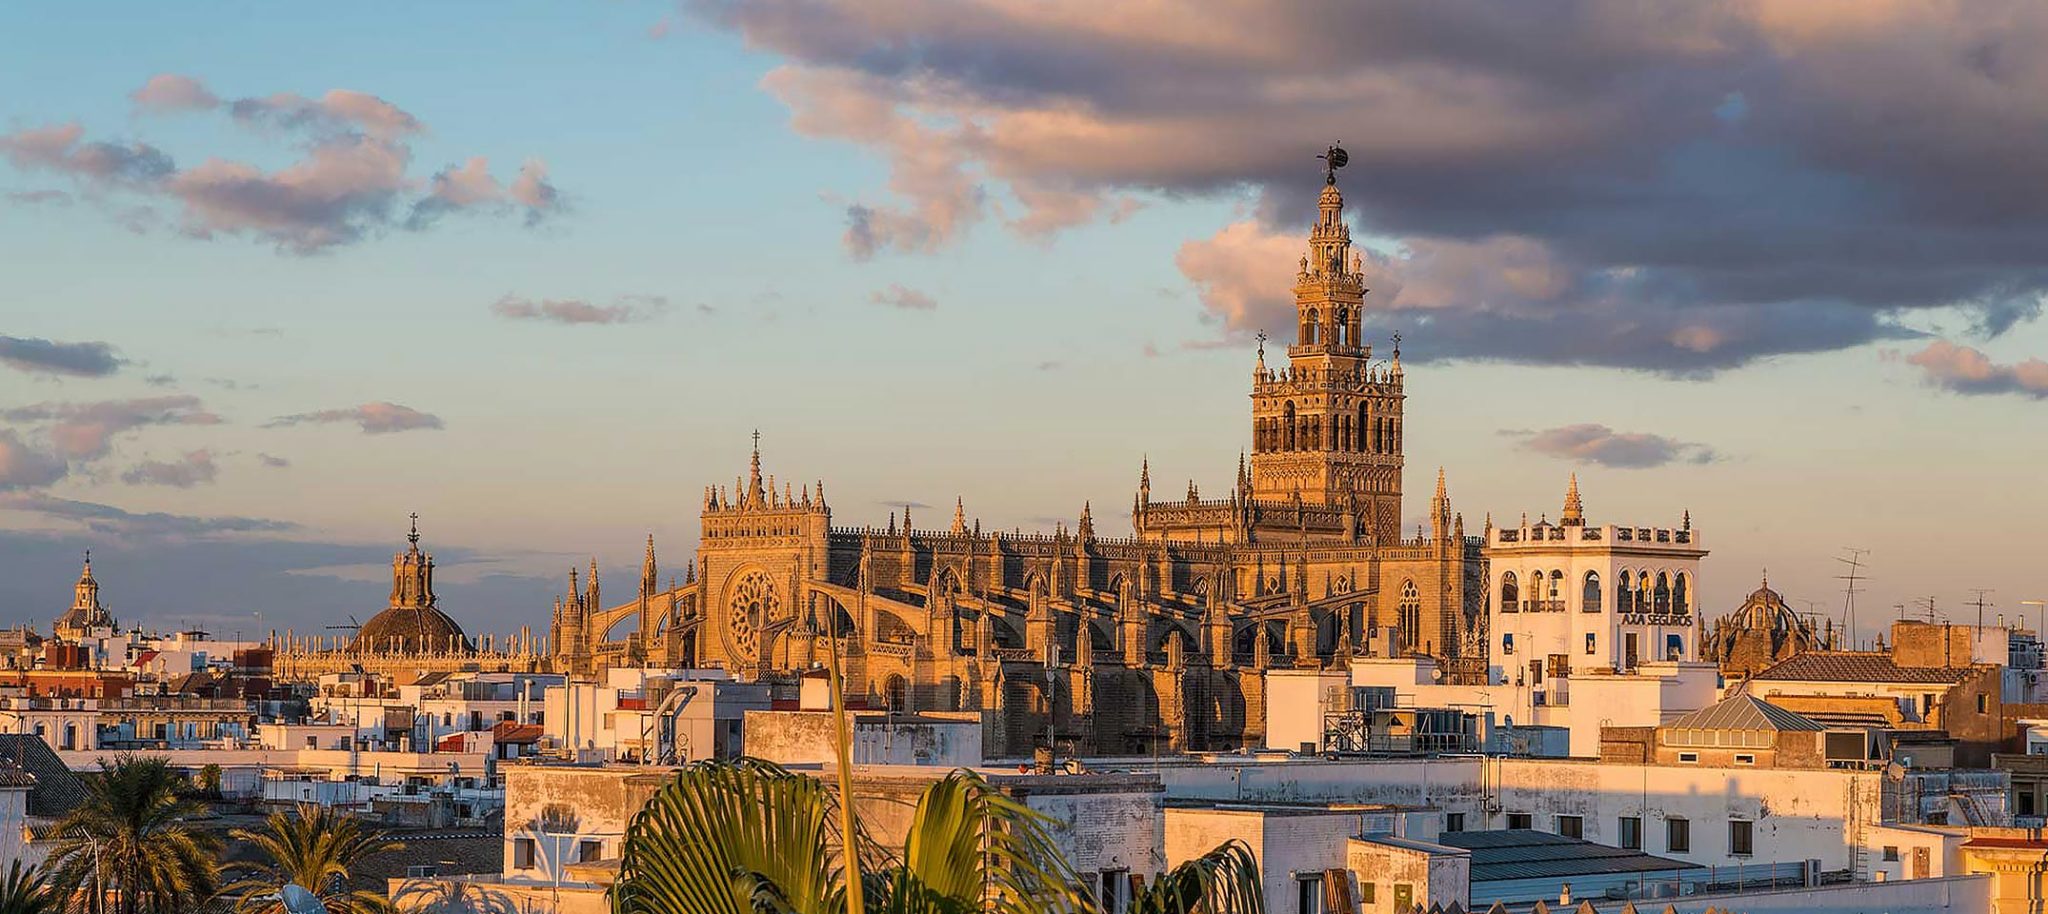 History of the Cathedral - Cathedral of Seville